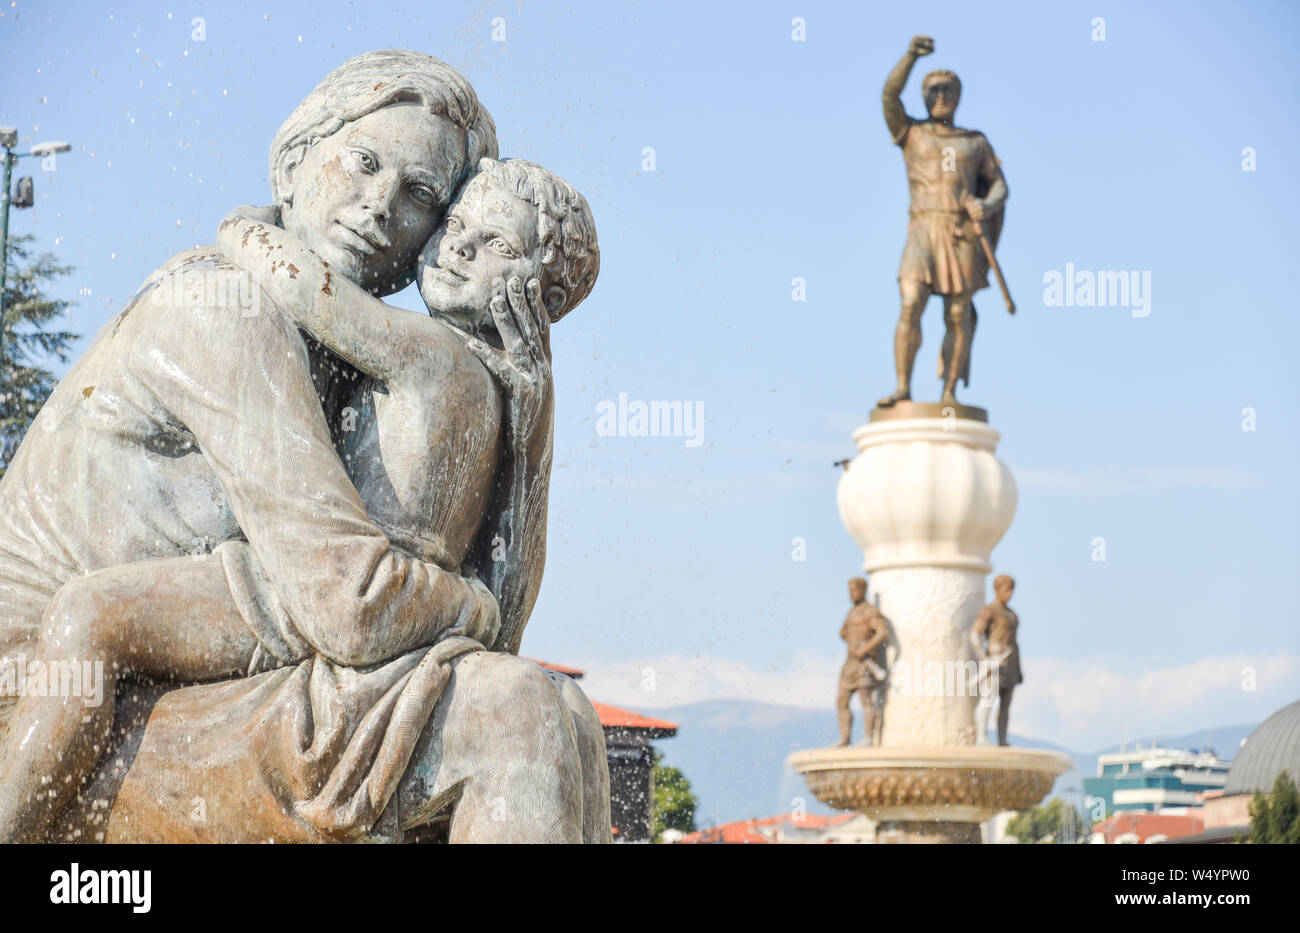 SKOPJE,REPUBLIC OF NORTH MACEDONIA-AUGUST 25 2018:Neo classical statues relating to Alexander the Great stand in many locations in the city center. Stock Photo